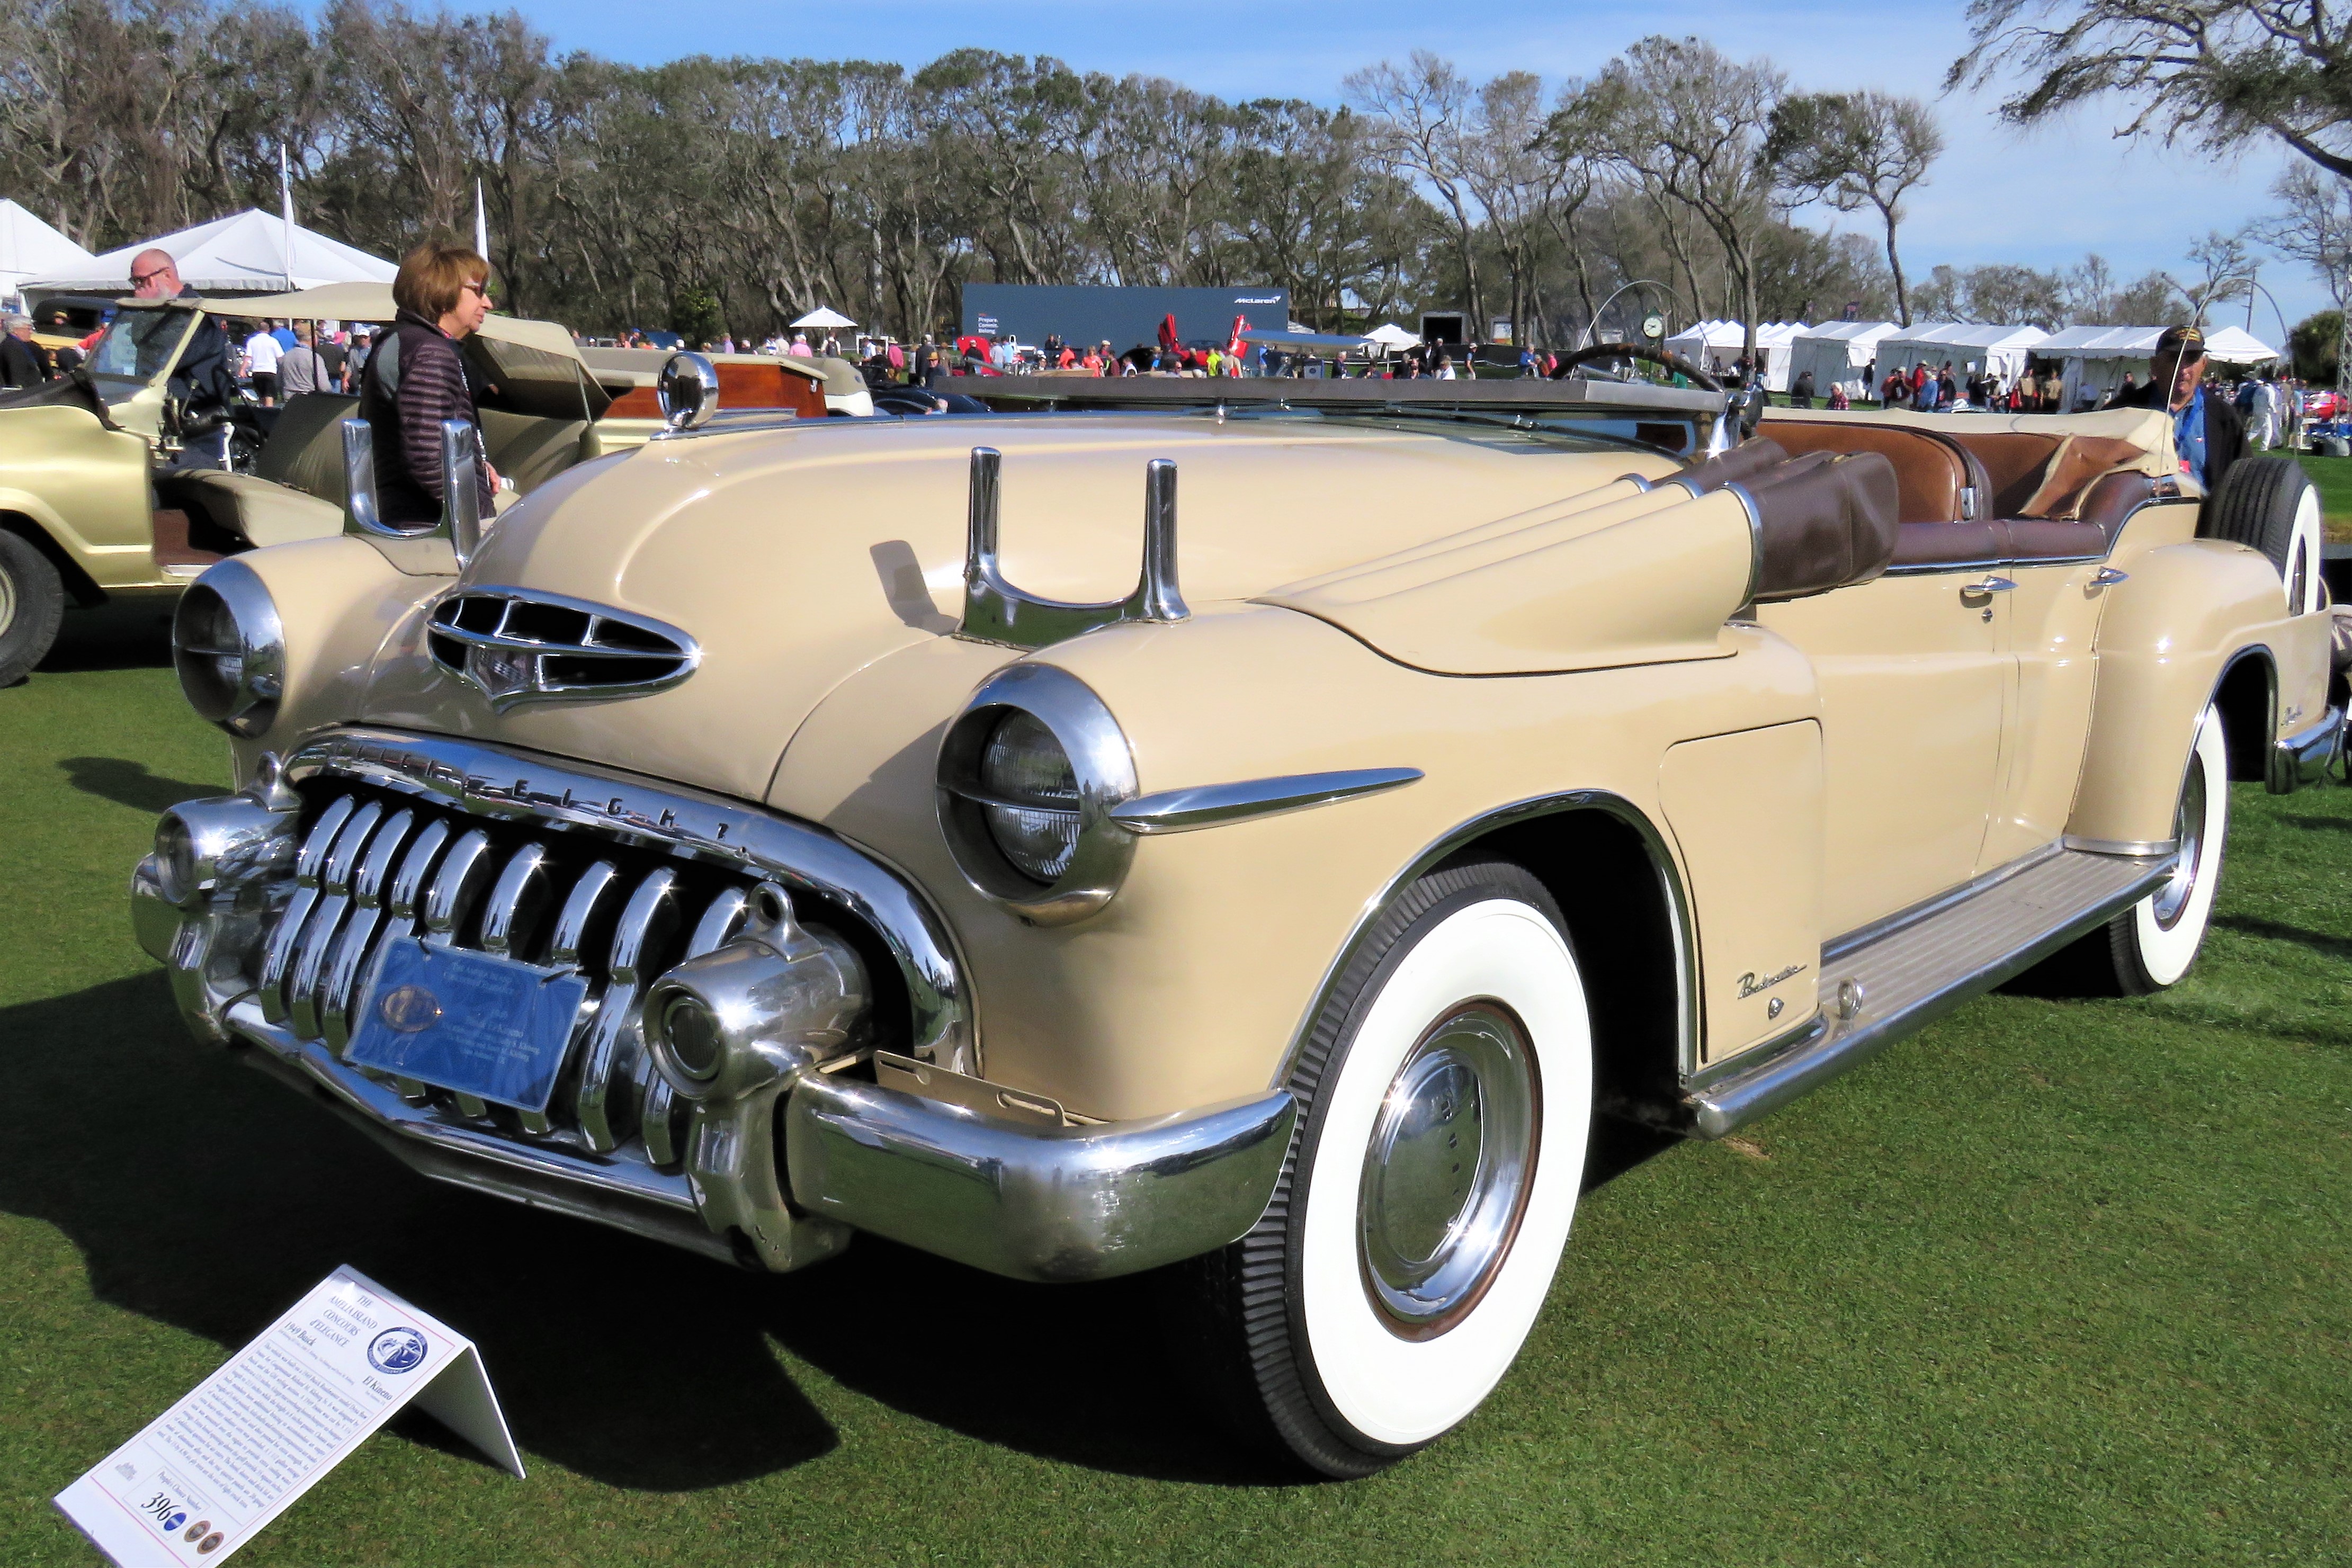 , Tales of the classics: Amelia concours owners, experts talk cars, ClassicCars.com Journal